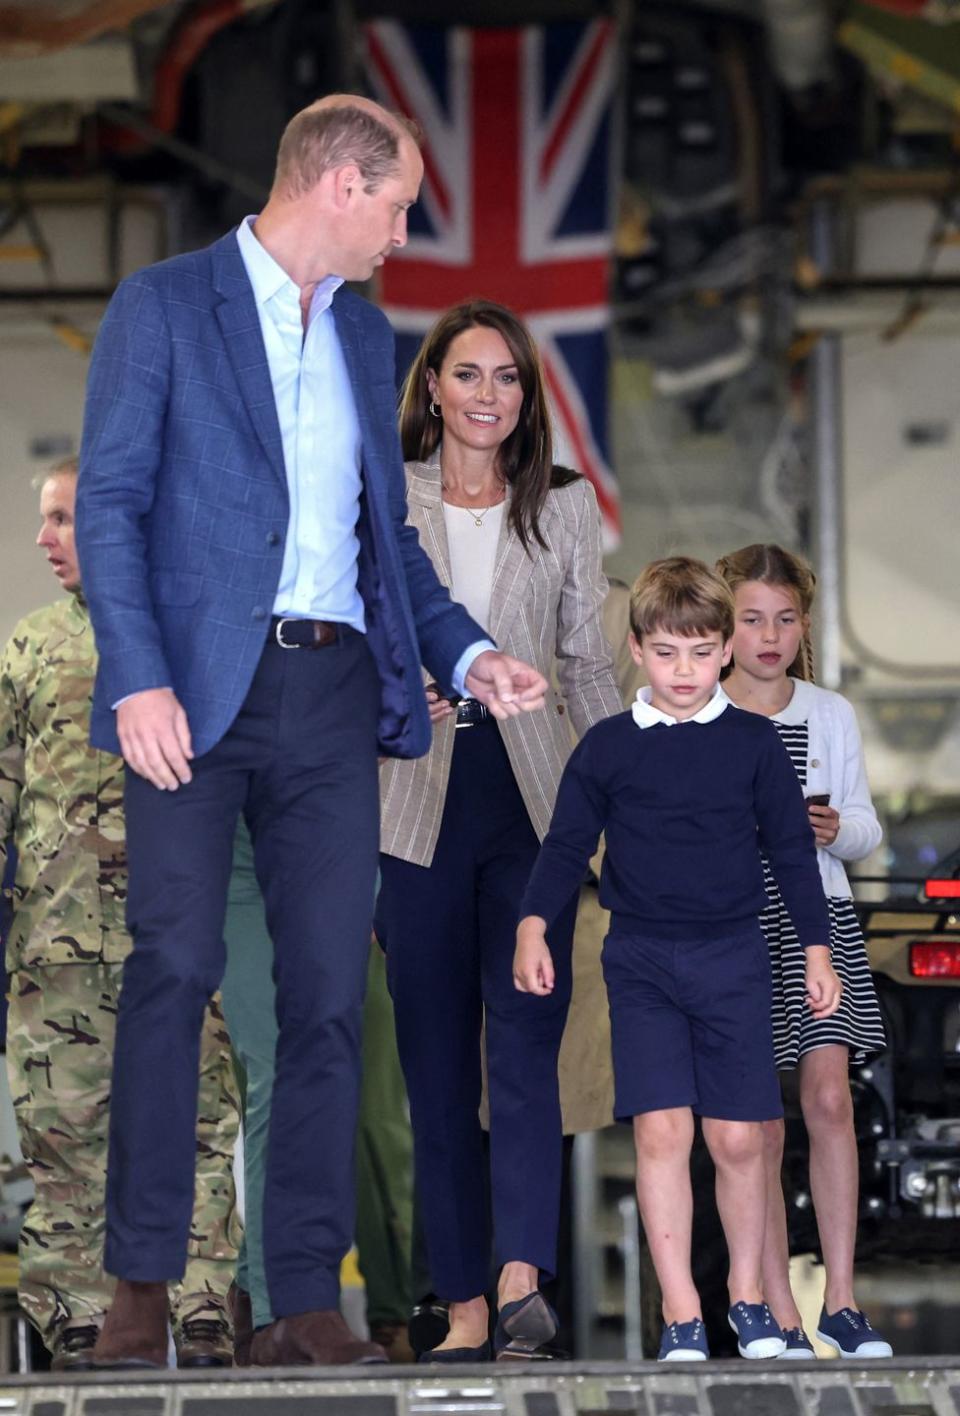 britains prince louis of wales 2r, britains catherine, princess of wales 2l, britains prince william, prince of wales l and britains princess charlotte of wales r walk down the ramp of a c17 during a visit to the air tattoo at raf fairford on july 14, 2023 in fairford, central england photo by chris jackson pool afp photo by chris jacksonpoolafp via getty images